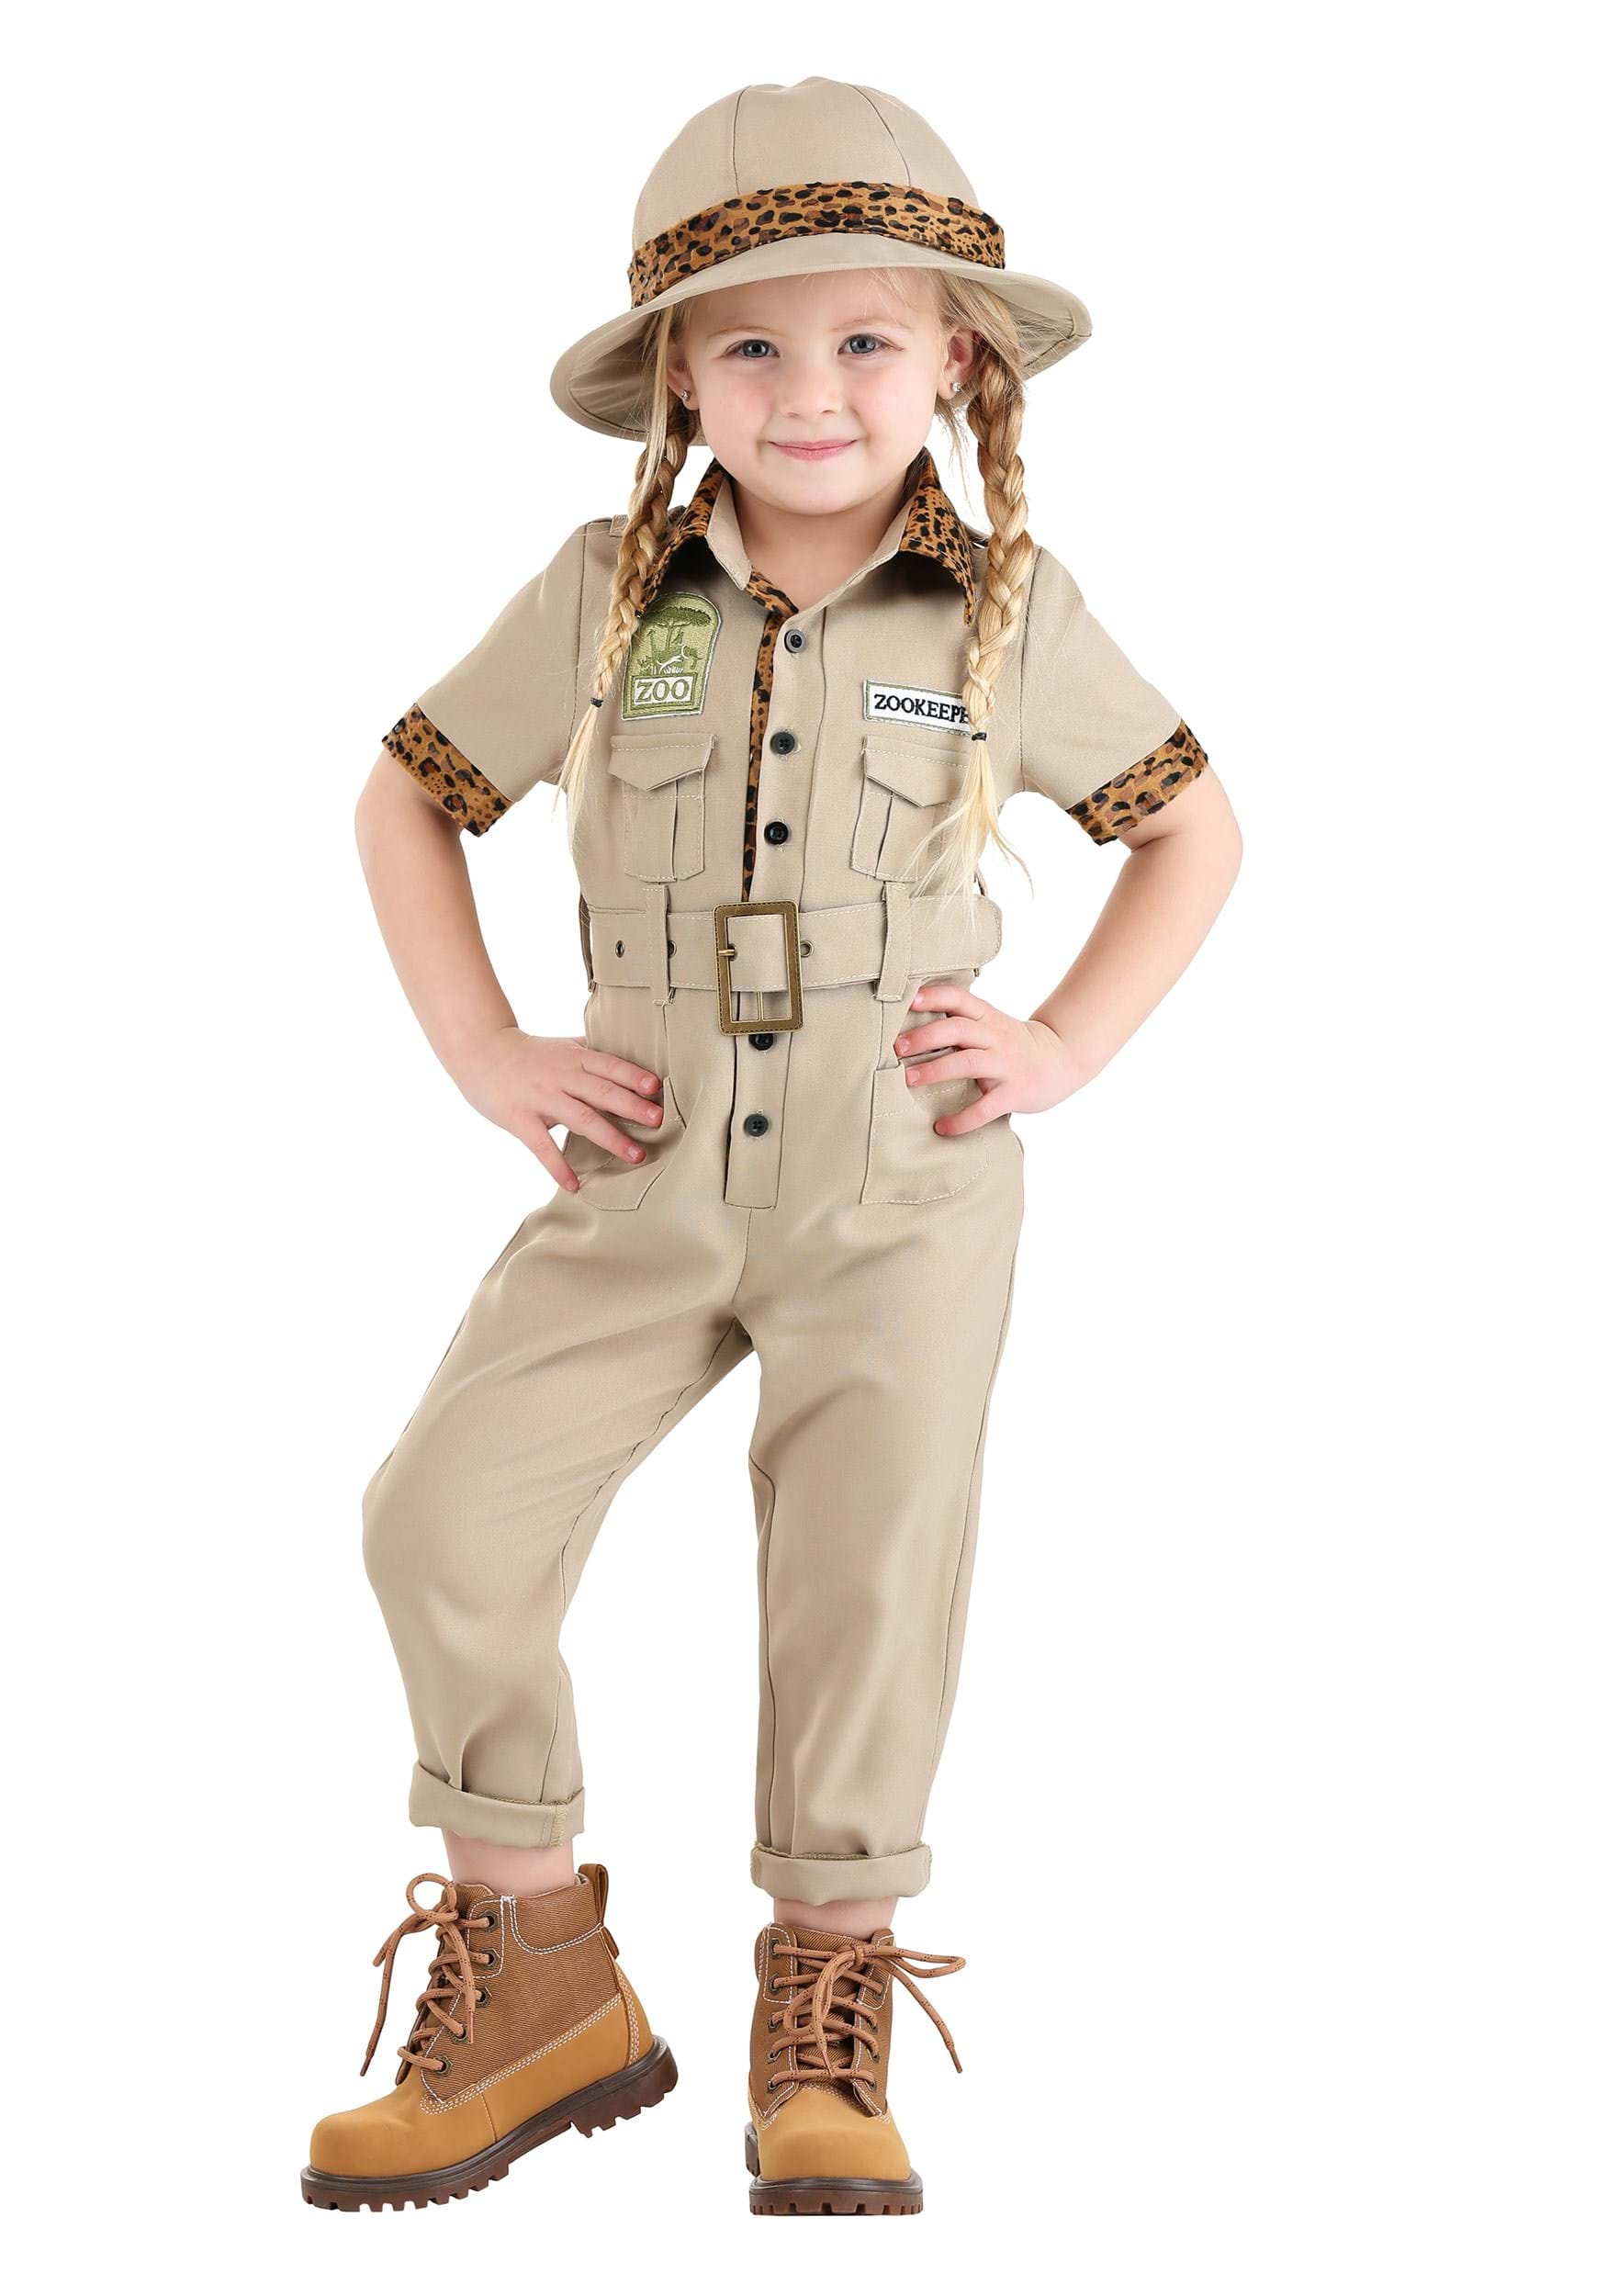 Photos - Fancy Dress Toddler FUN Costumes  Zookeeper Costume Black/Brown 